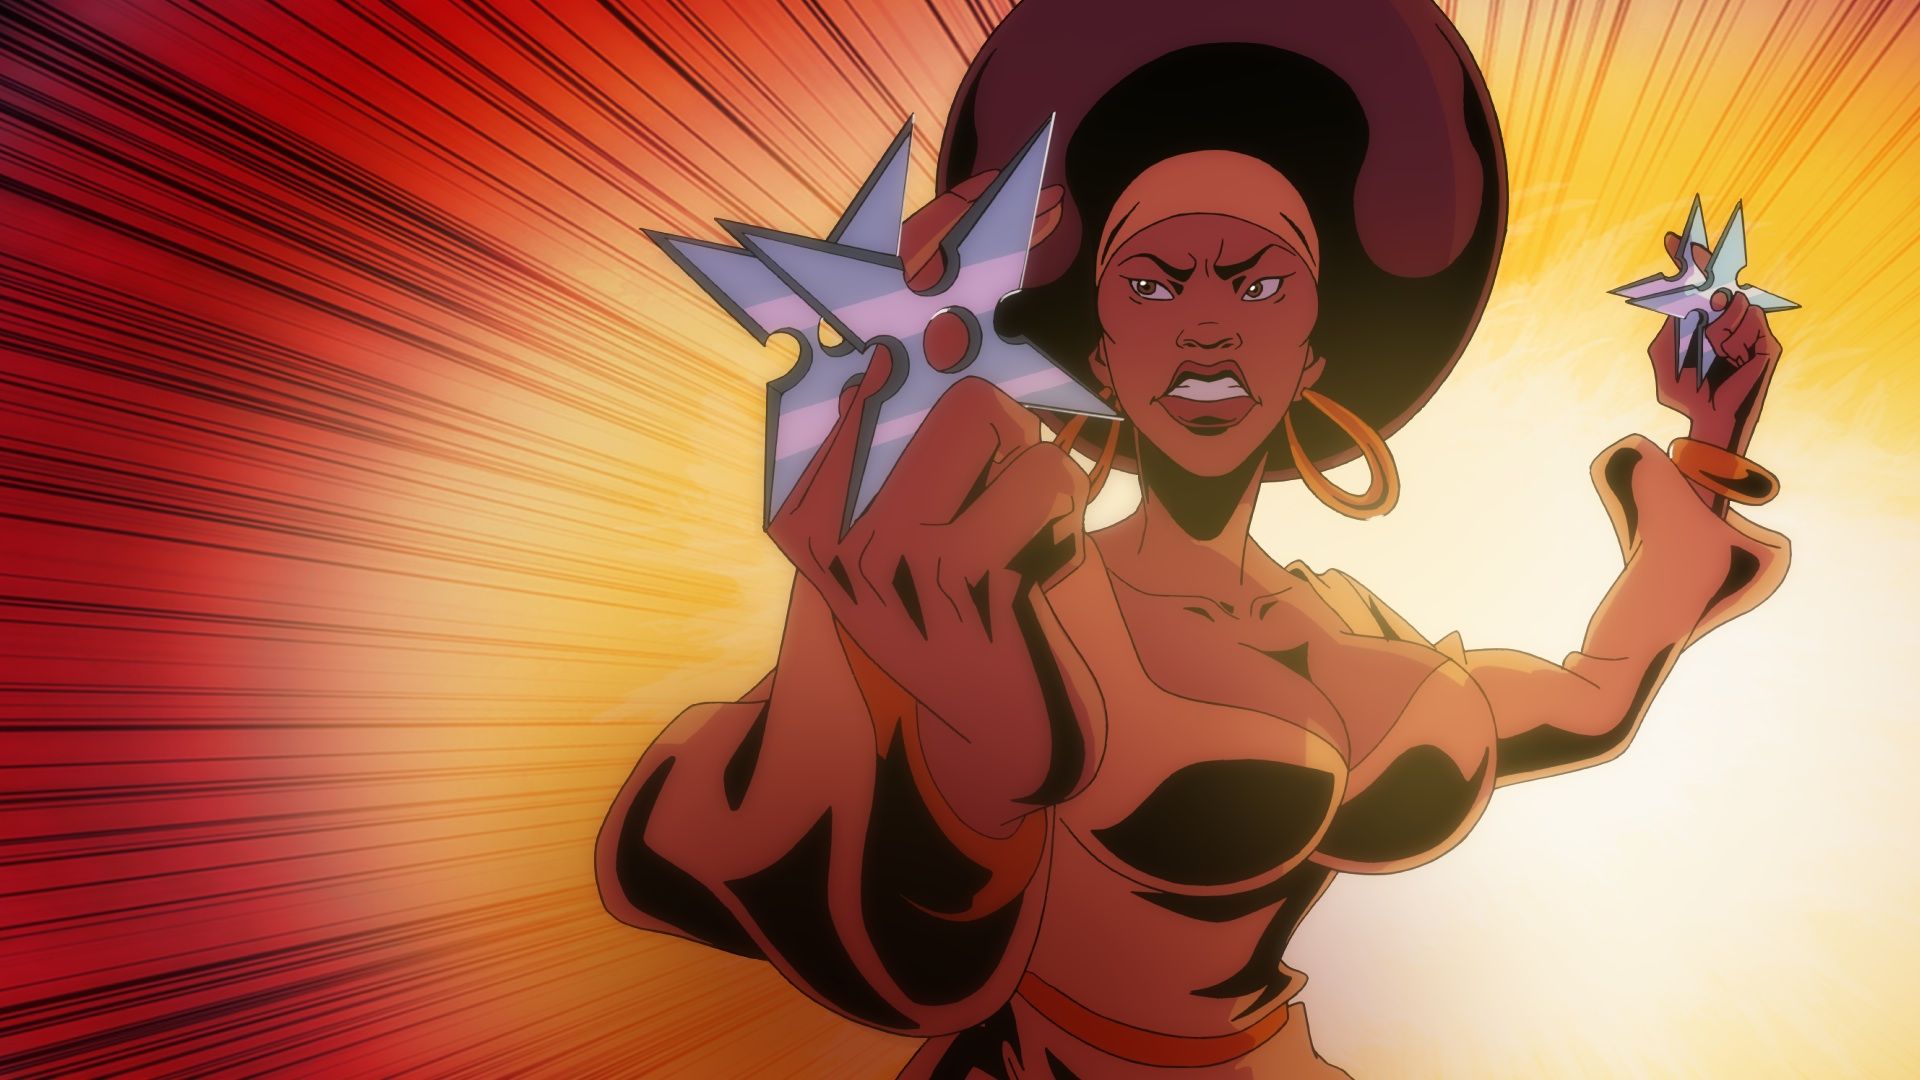 BLACK DYNAMITE Animated Series Trailer, Posters, and Image